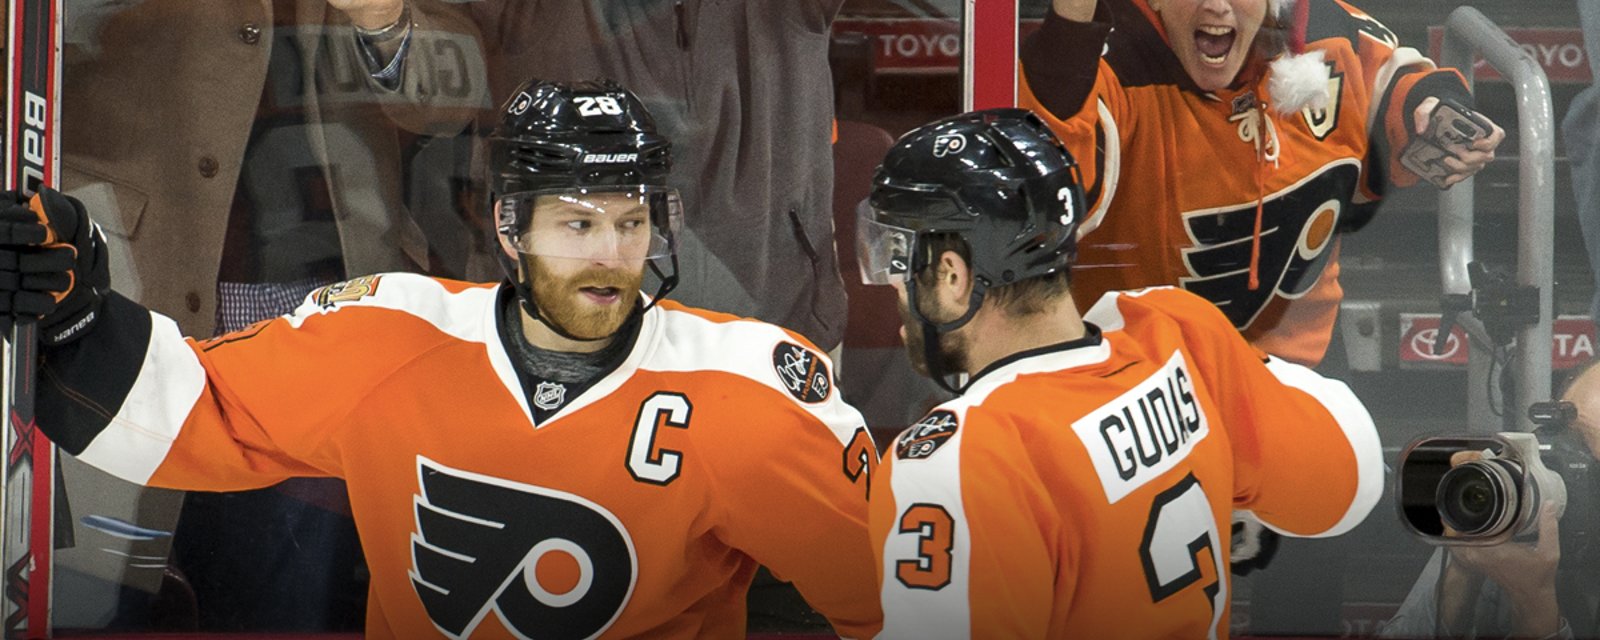 Report: Injury updates to 2 key players at Flyers' practice